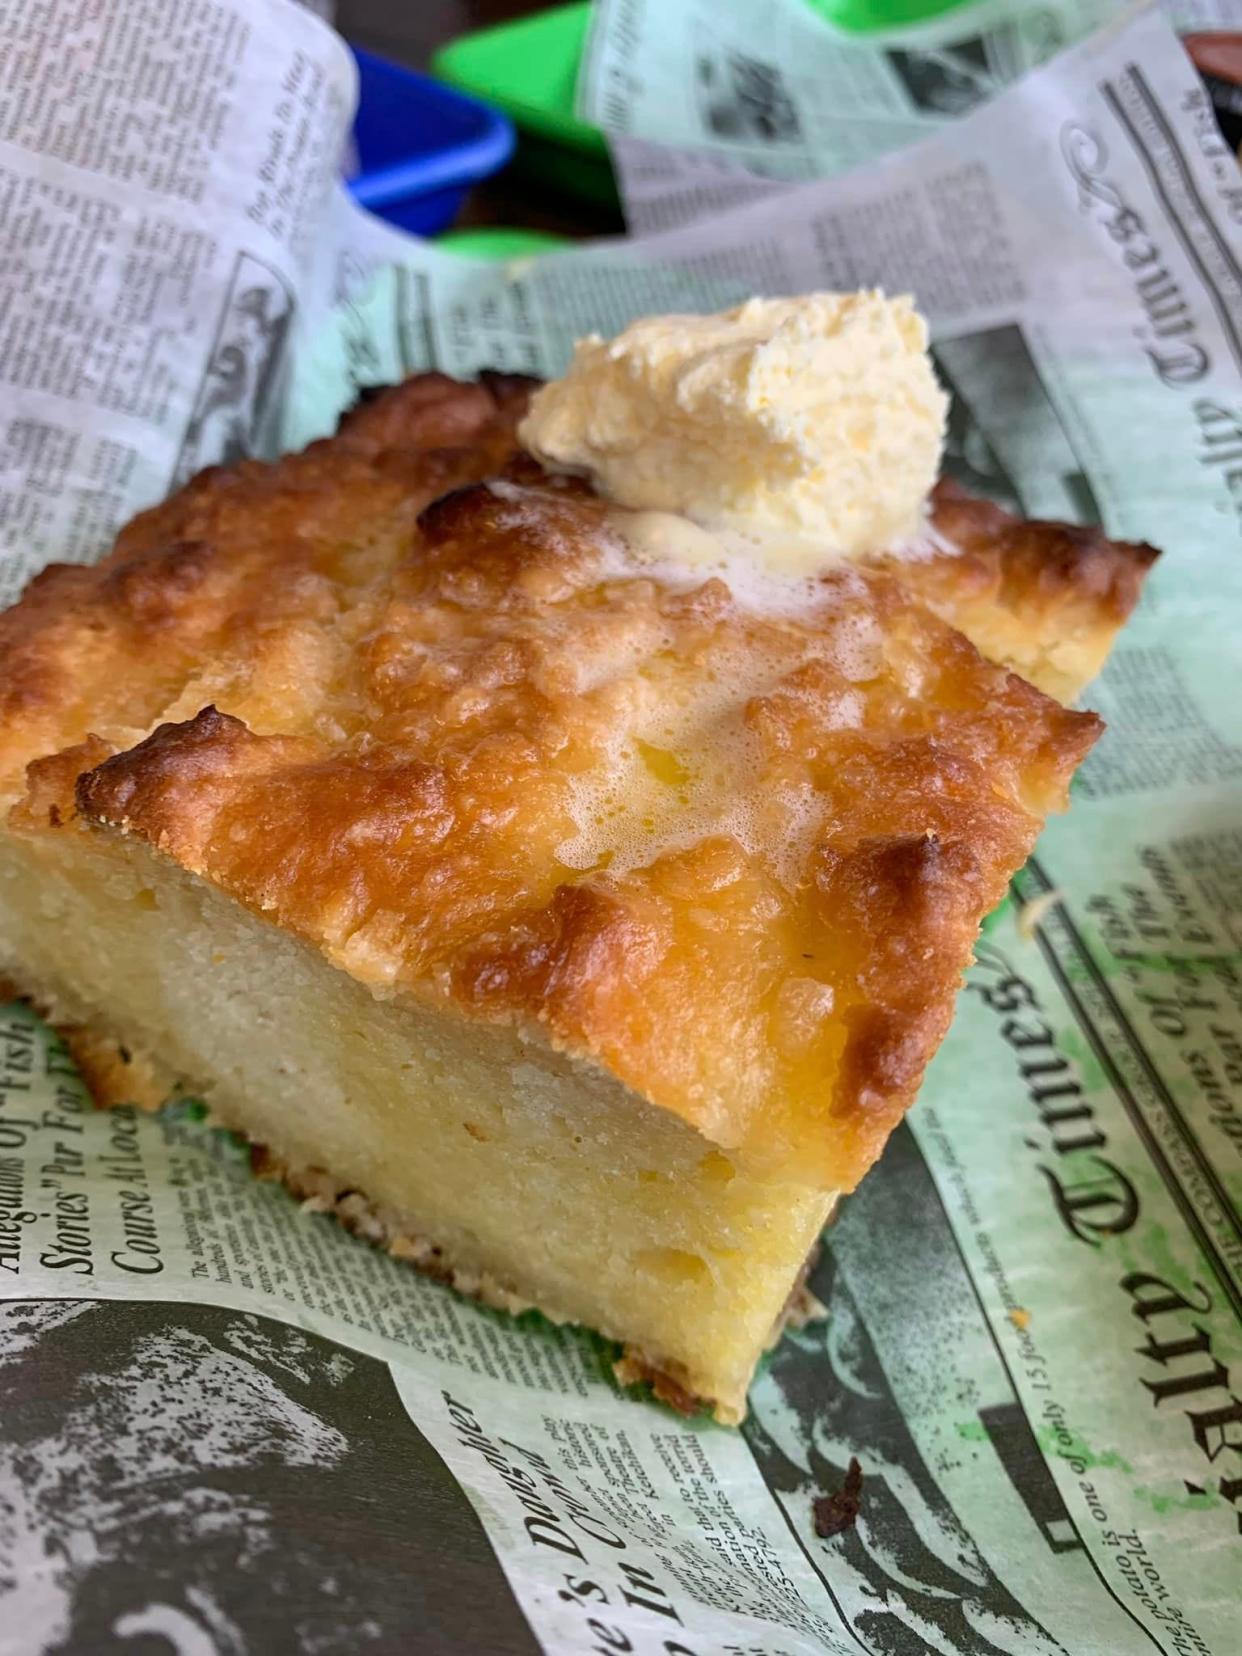 Biscuit bread at Big Daddy J's 5 Great Things Watering Station and Restaurant in Cocoa Beach comes topped with a generous scoop of butter.